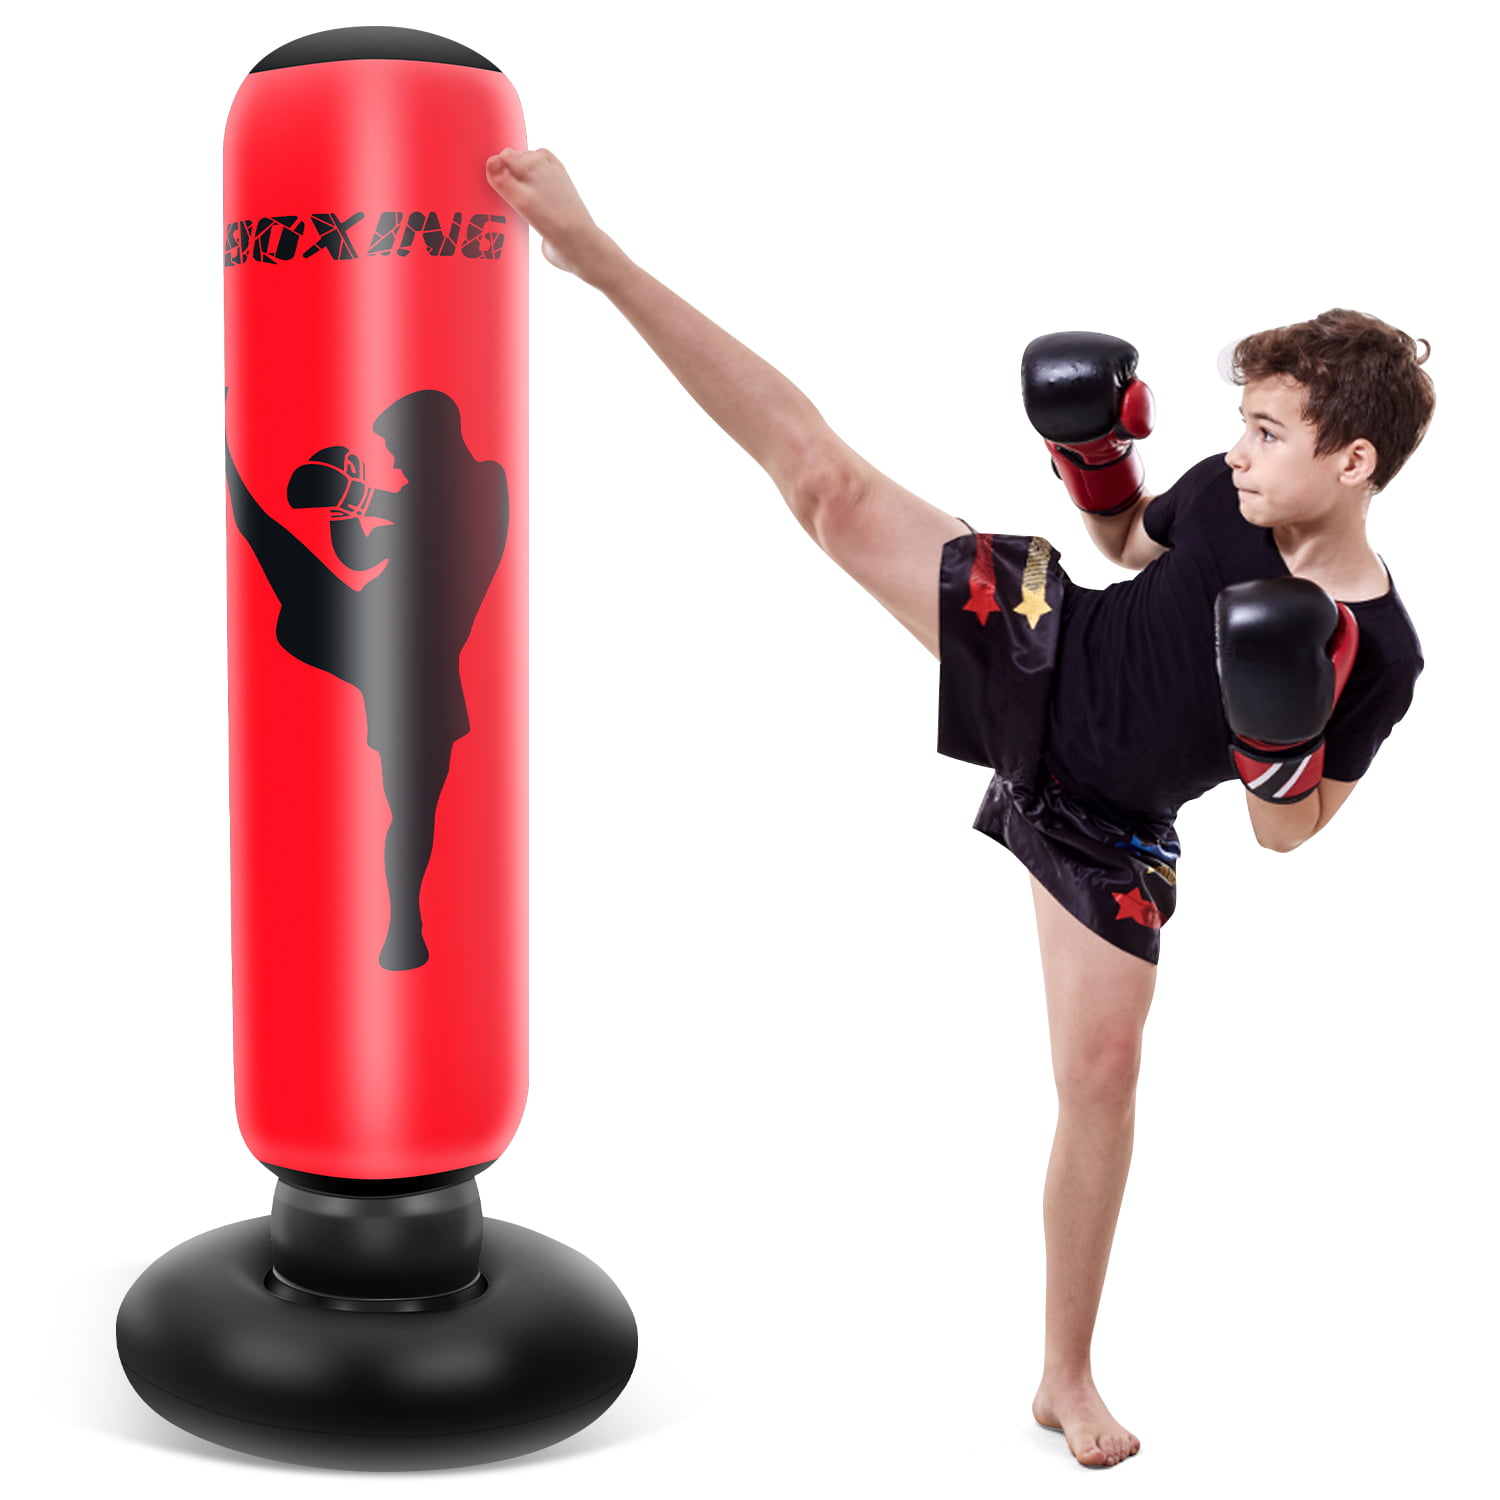 63inch Inflatable Punching Bag Kids Adults Freestanding Boxing Bag Heavy Fitness Punching Bag for Children Bounce-Back Action Practicing Karate Boxing Kickboxing Muay Thai 